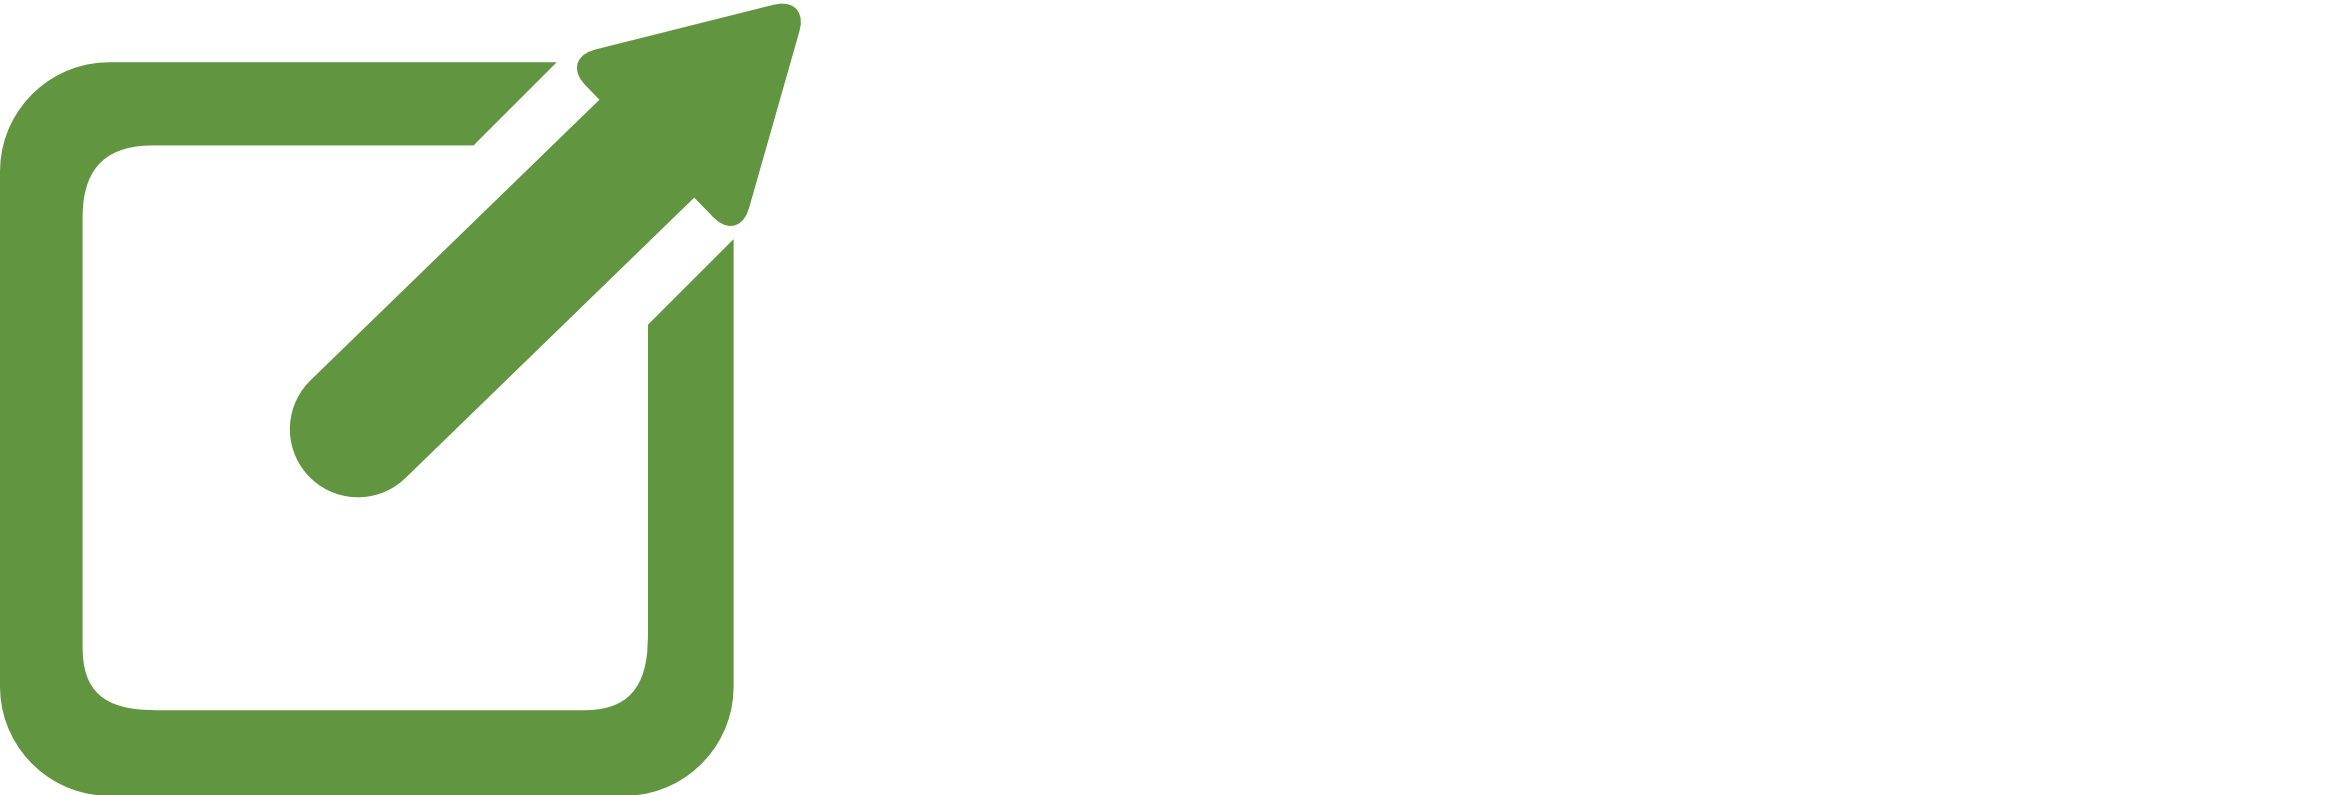 Could not load X10D-Logo